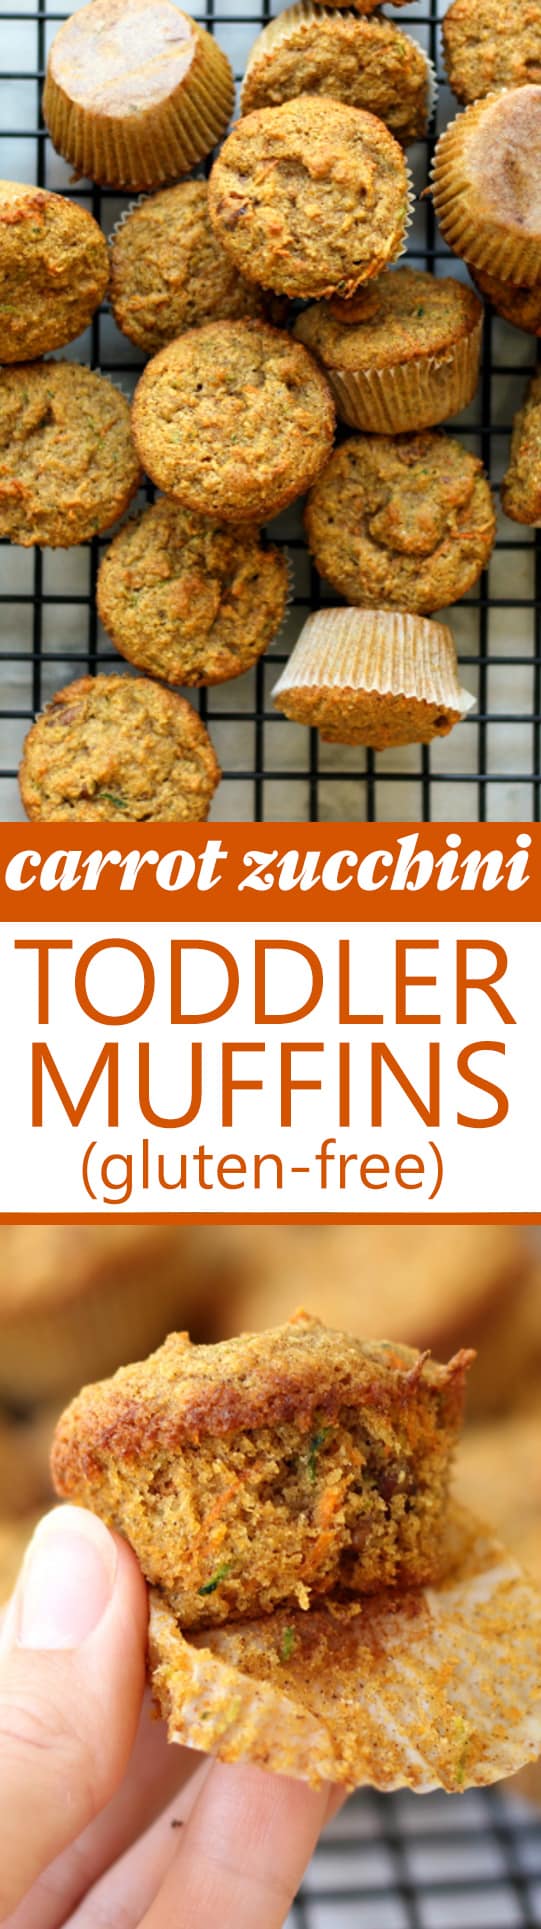 Carrot Zucchini Toddler Muffins! Gluten-free, lightly sweet and full of hidden veggies. A delicious healthy toddler or kid snack!